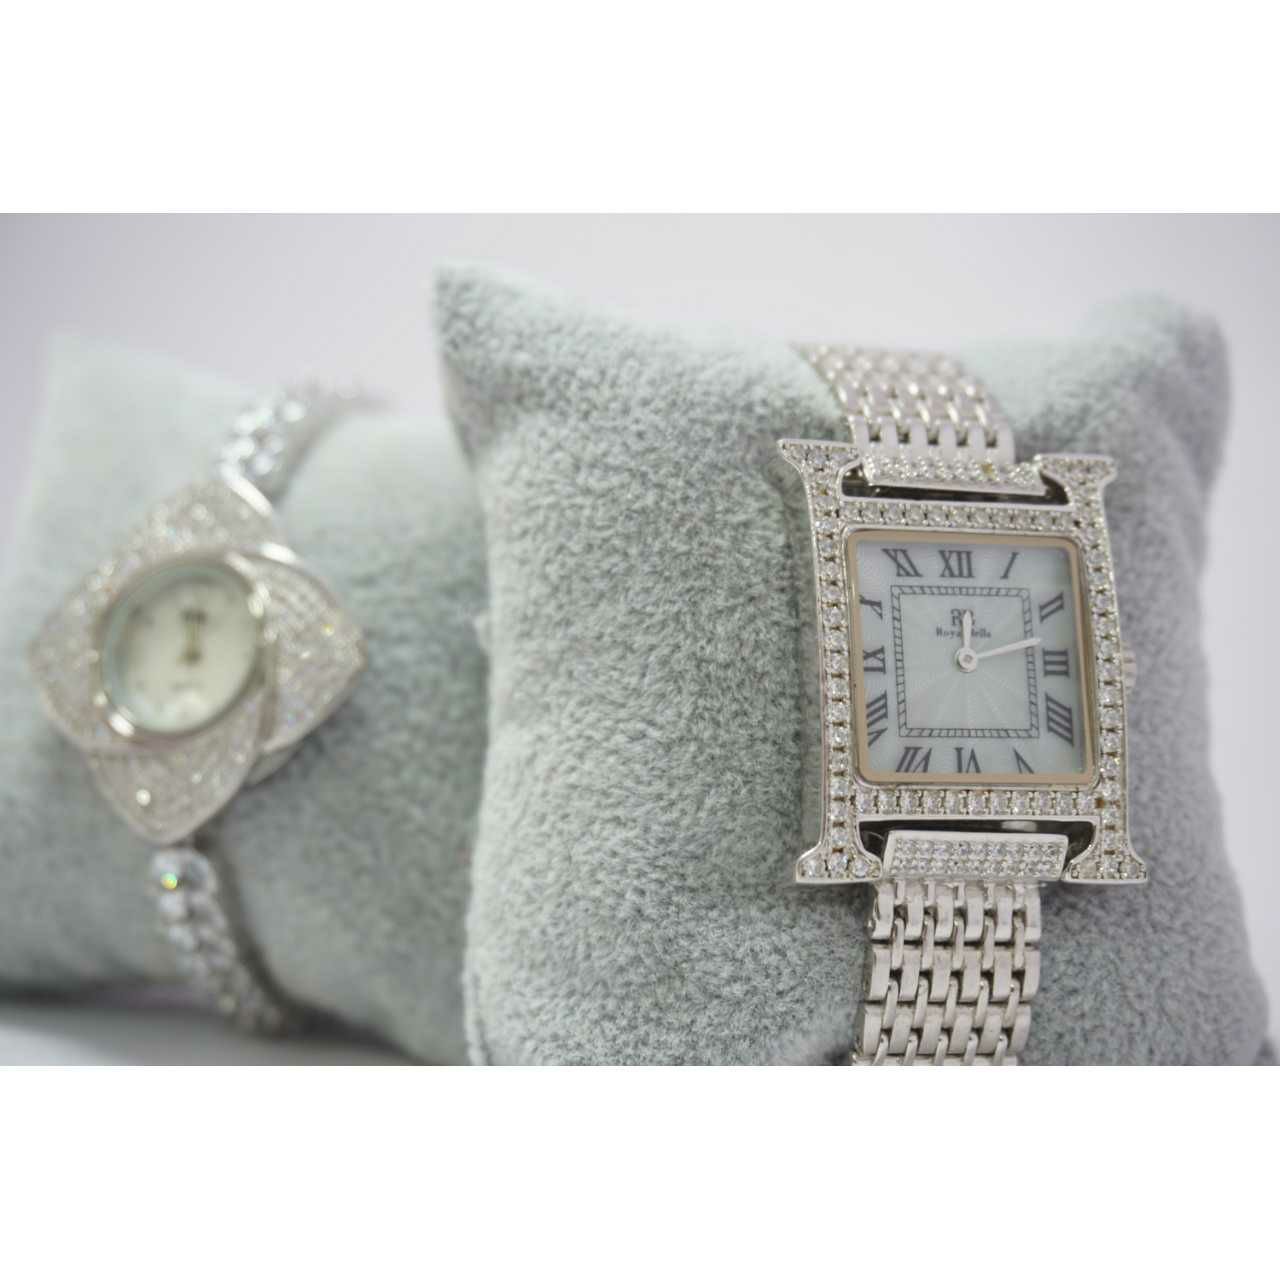 92.5 Sterling Silver Square Micro Dial Watch Ms-3909